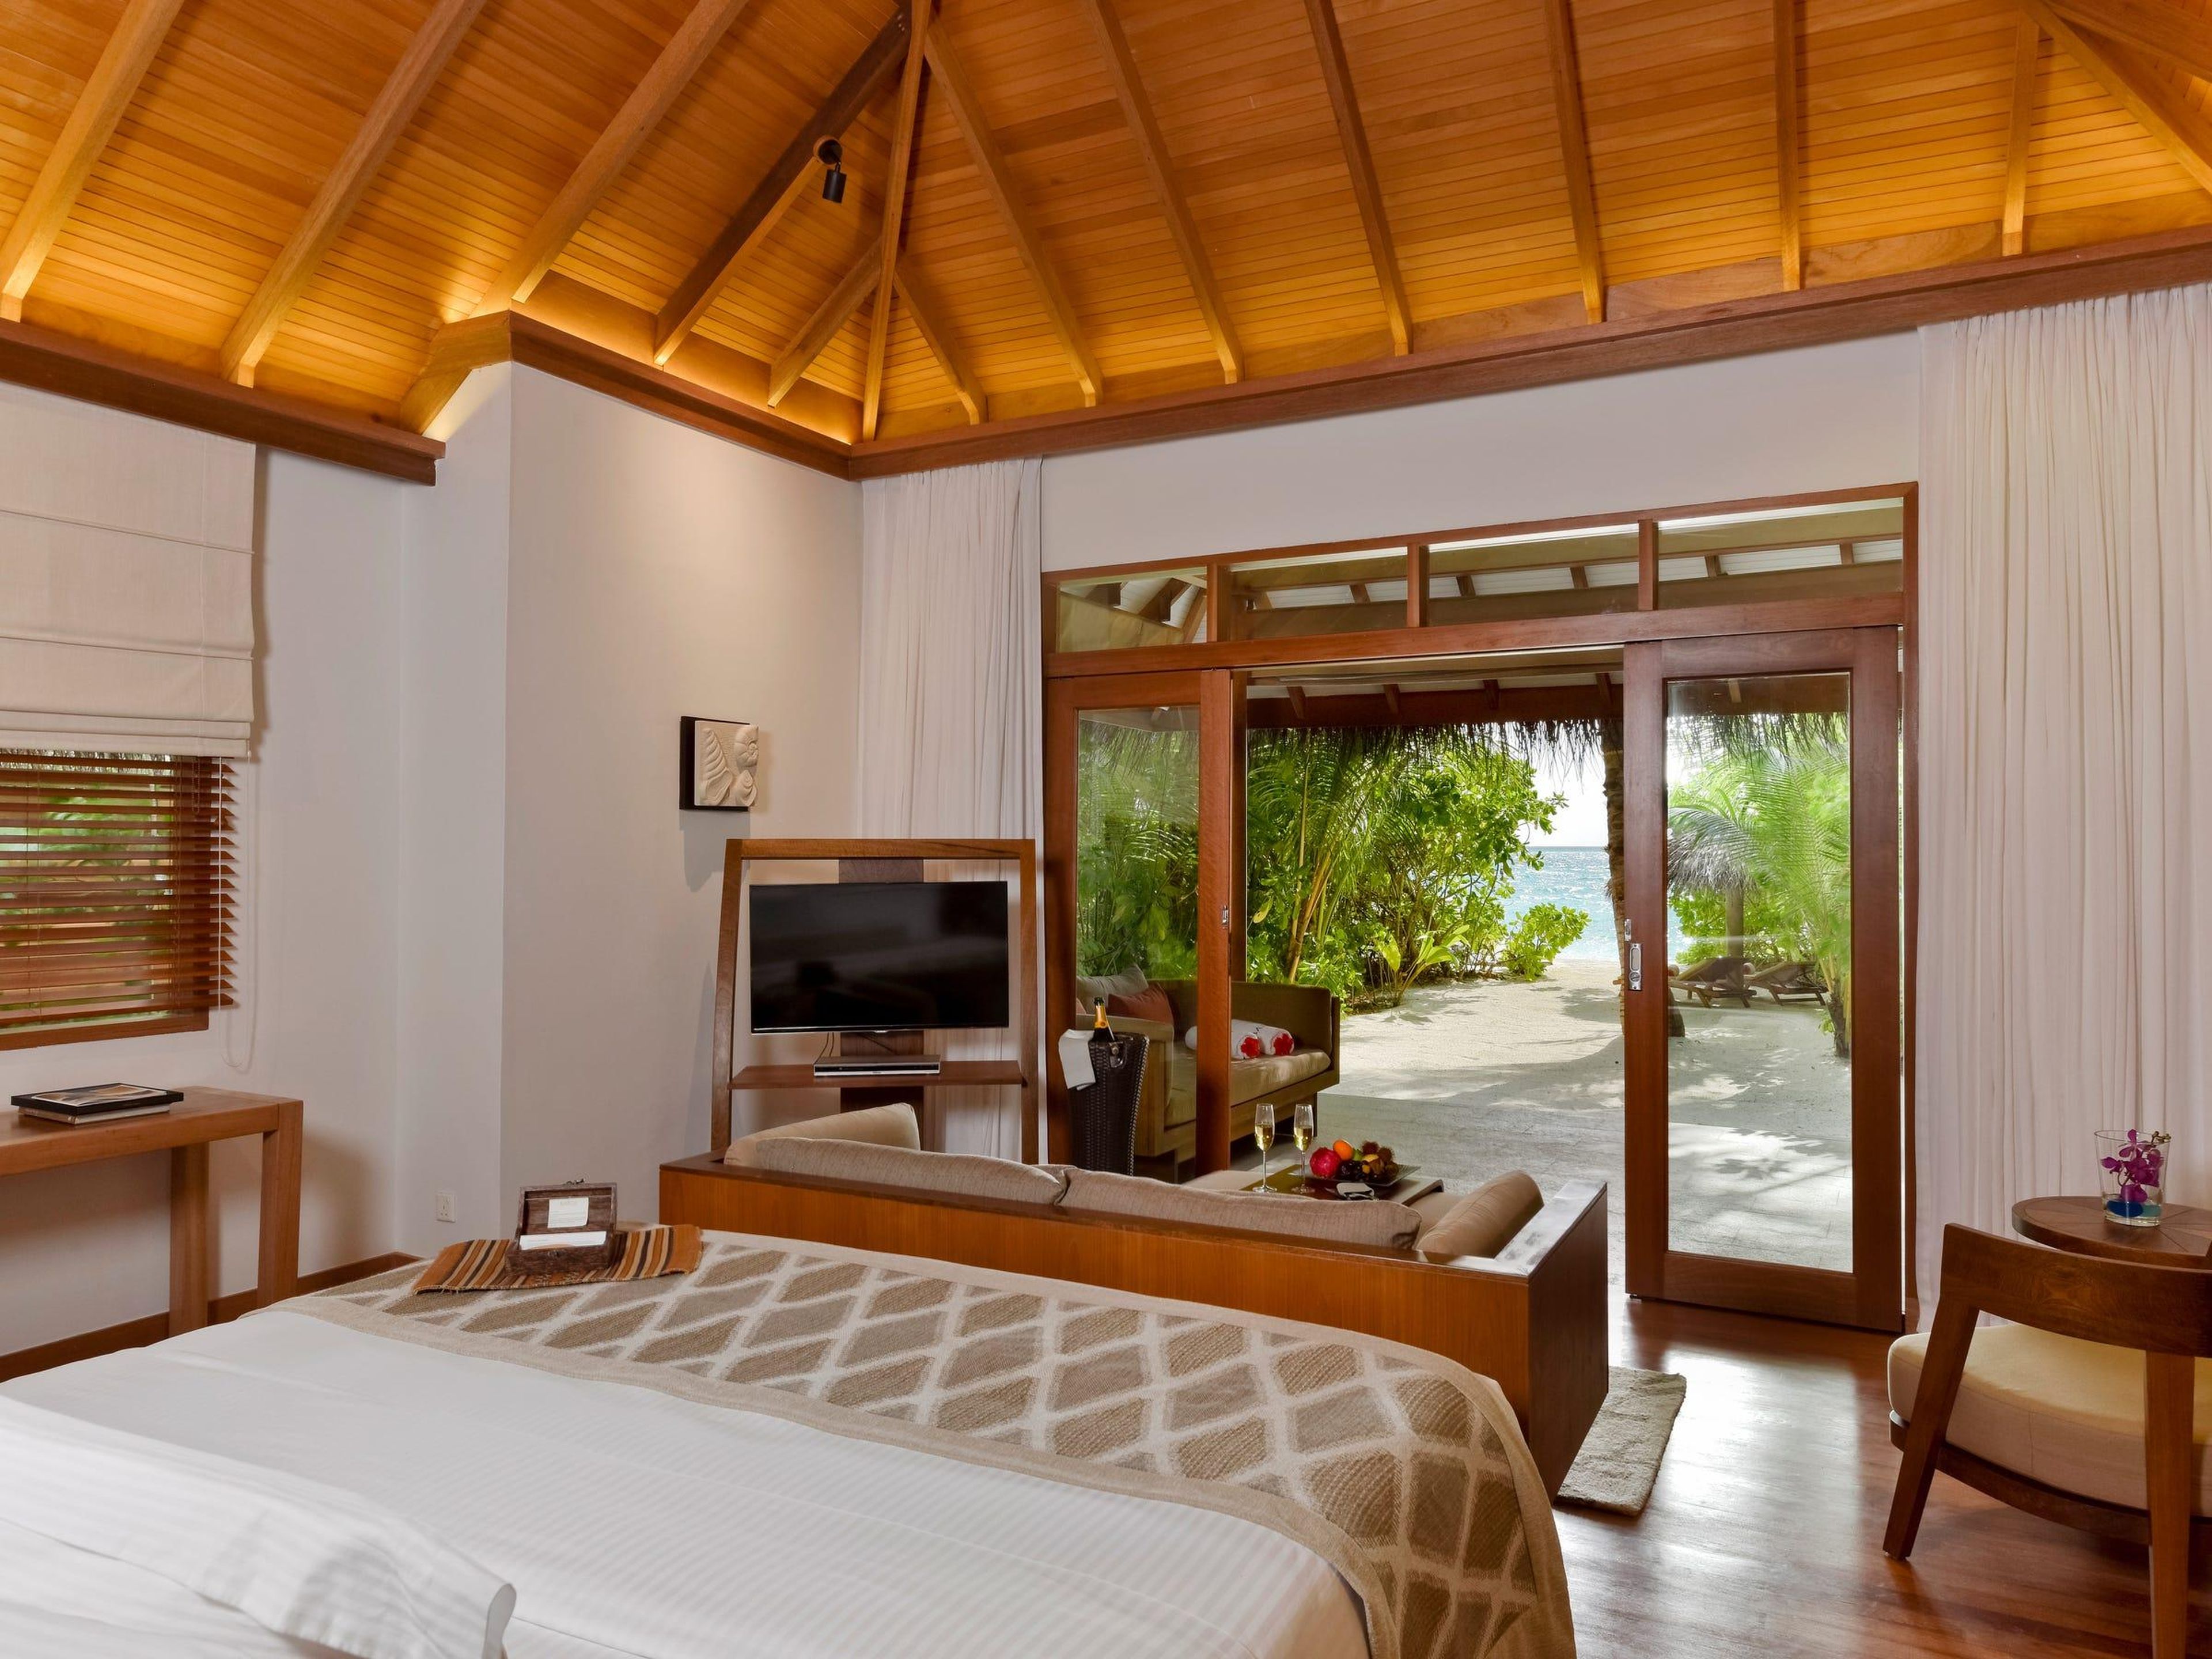 Baros has 24 Deluxe Villas, which offer 958 square feet of living space and open-air bathrooms.